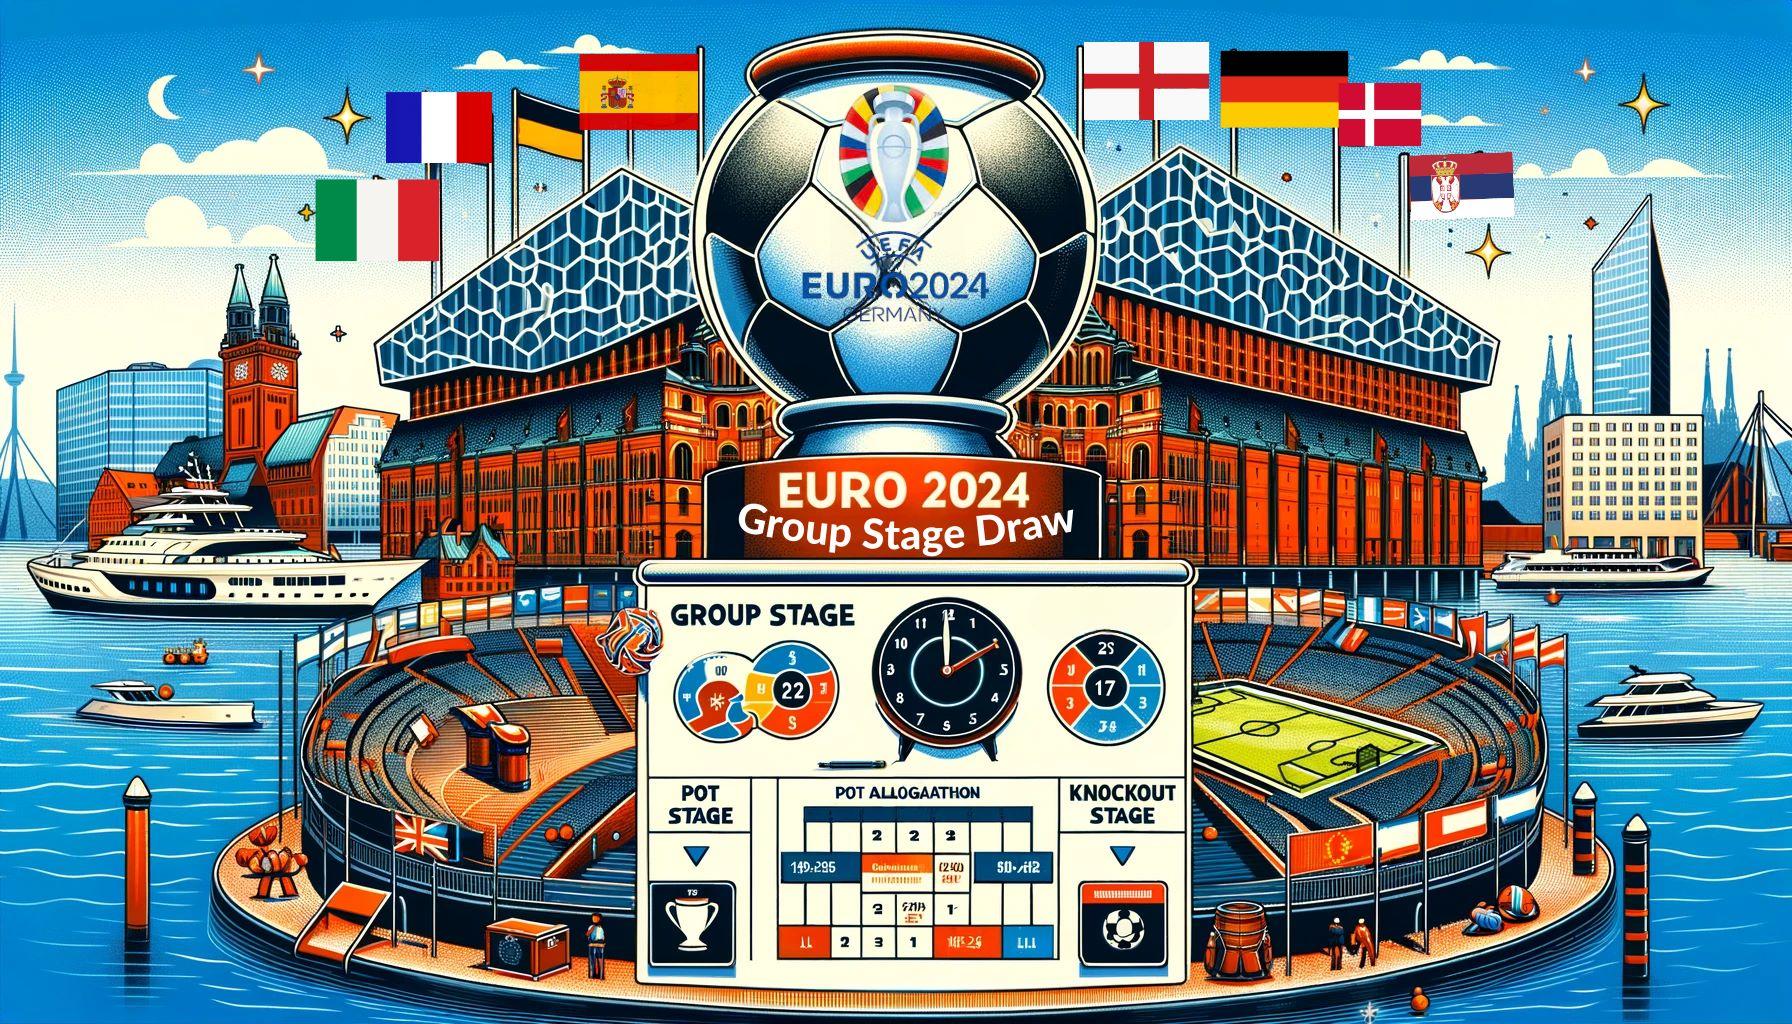 Euro 2024 Group Stage Draw Excitement Builds in Germany!